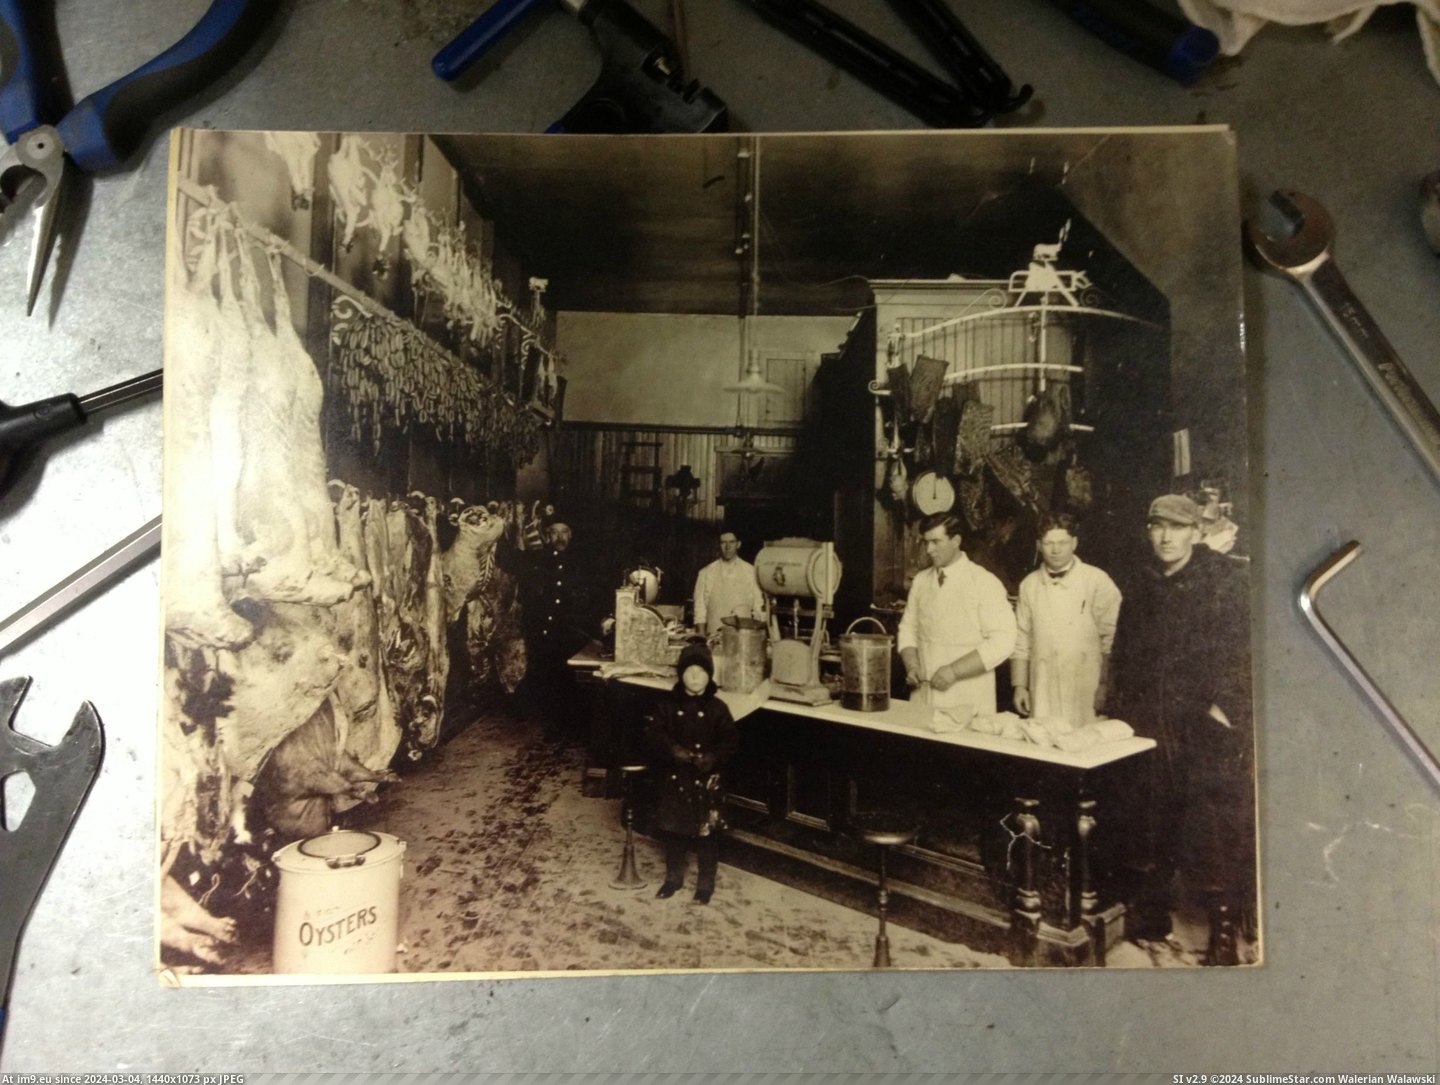 #Was #Left #Interesting #Originally #Butcher #Relics #Shop #Bike #Worked [Mildlyinteresting] Worked at a bike shop that was originally a butcher shop in the 1930's. Some interesting relics were left be Pic. (Image of album My r/MILDLYINTERESTING favs))